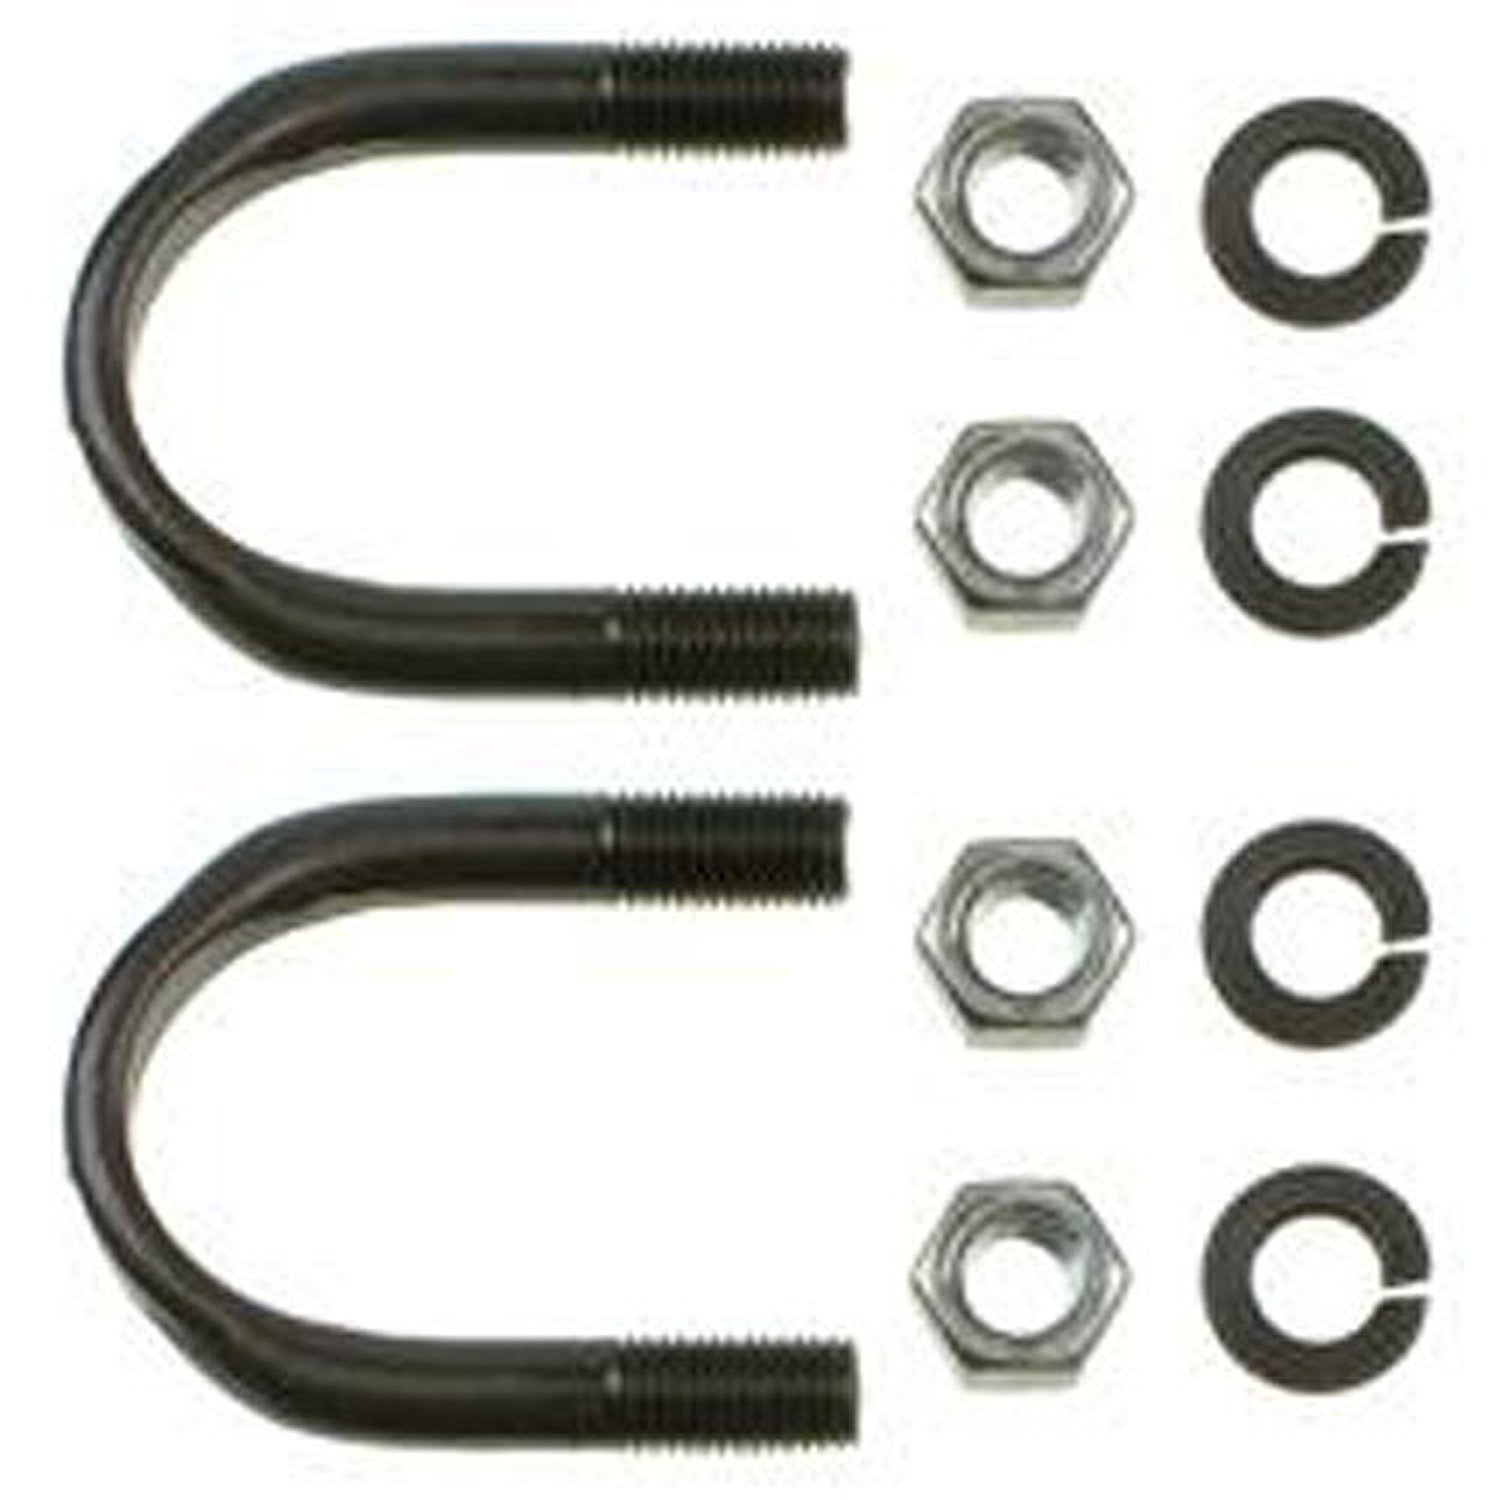 U-Bolt Kit For Use With 1210/1310/1330 Series Differentials